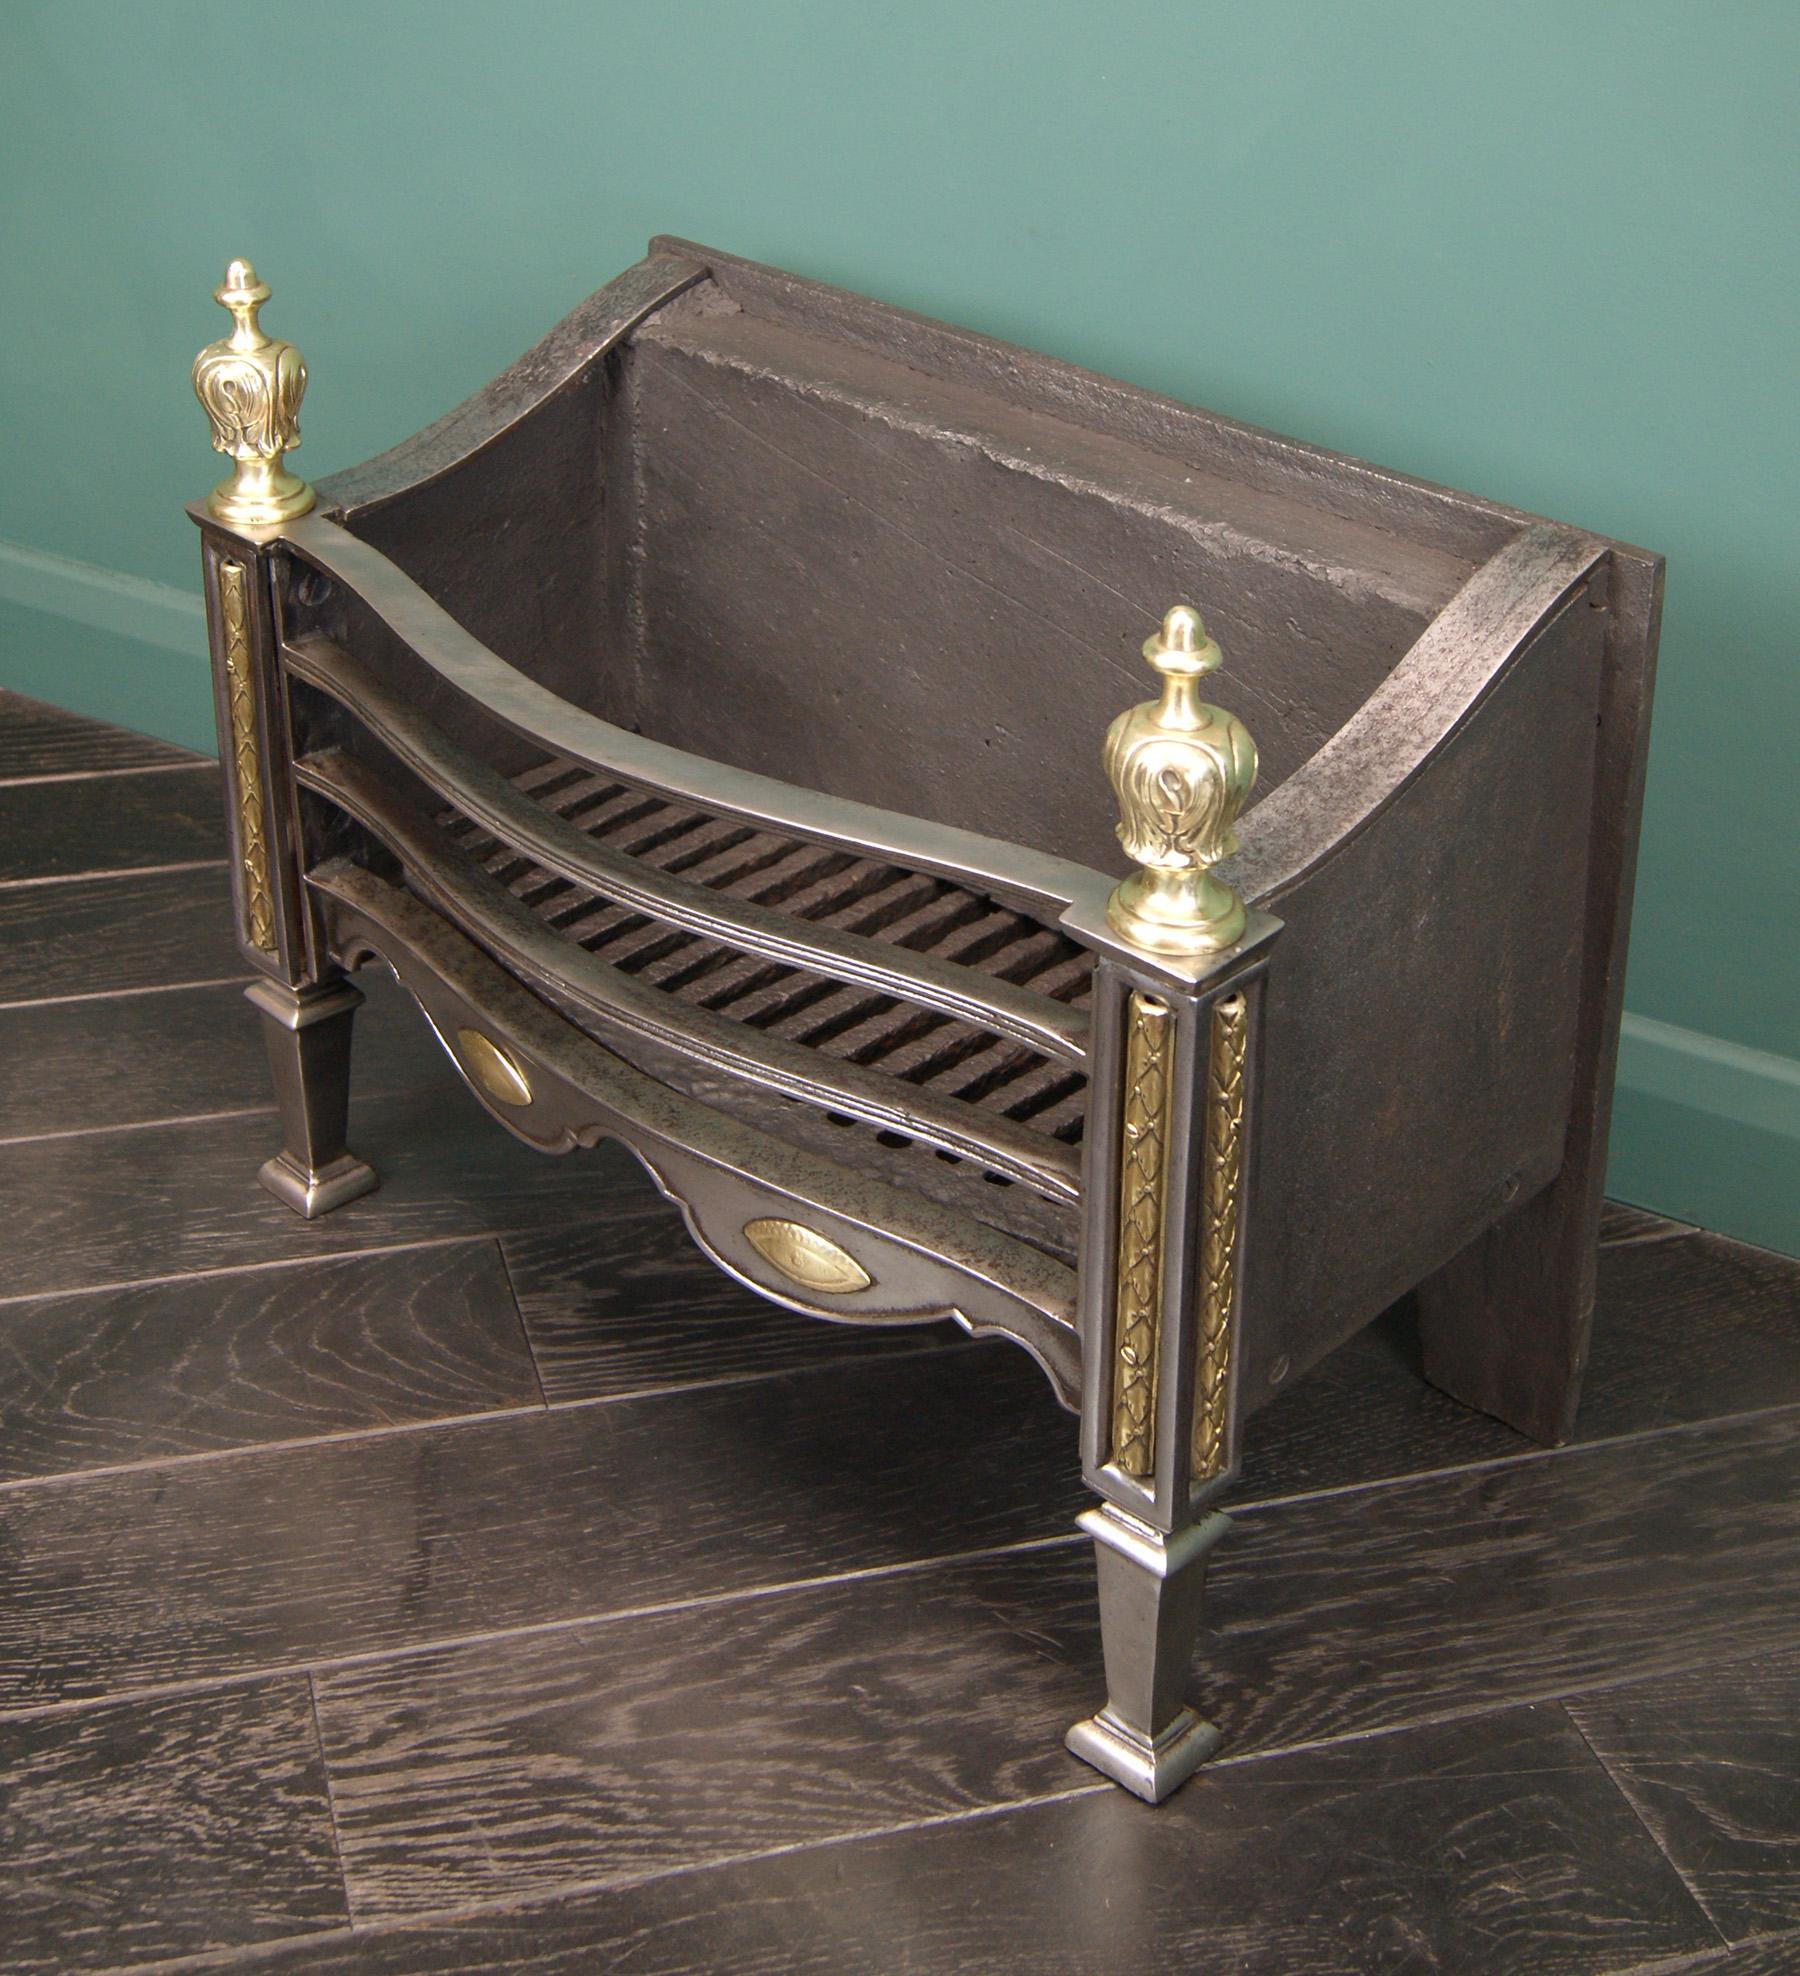 A finely cast polished brass and steel fire basket by Thomas Elsley, with reeded fire bars above a shaped fret with brass paterae, set between ornate panelled standards with tapered legs and decorative brass finials.  Restored.

Circa 1890.